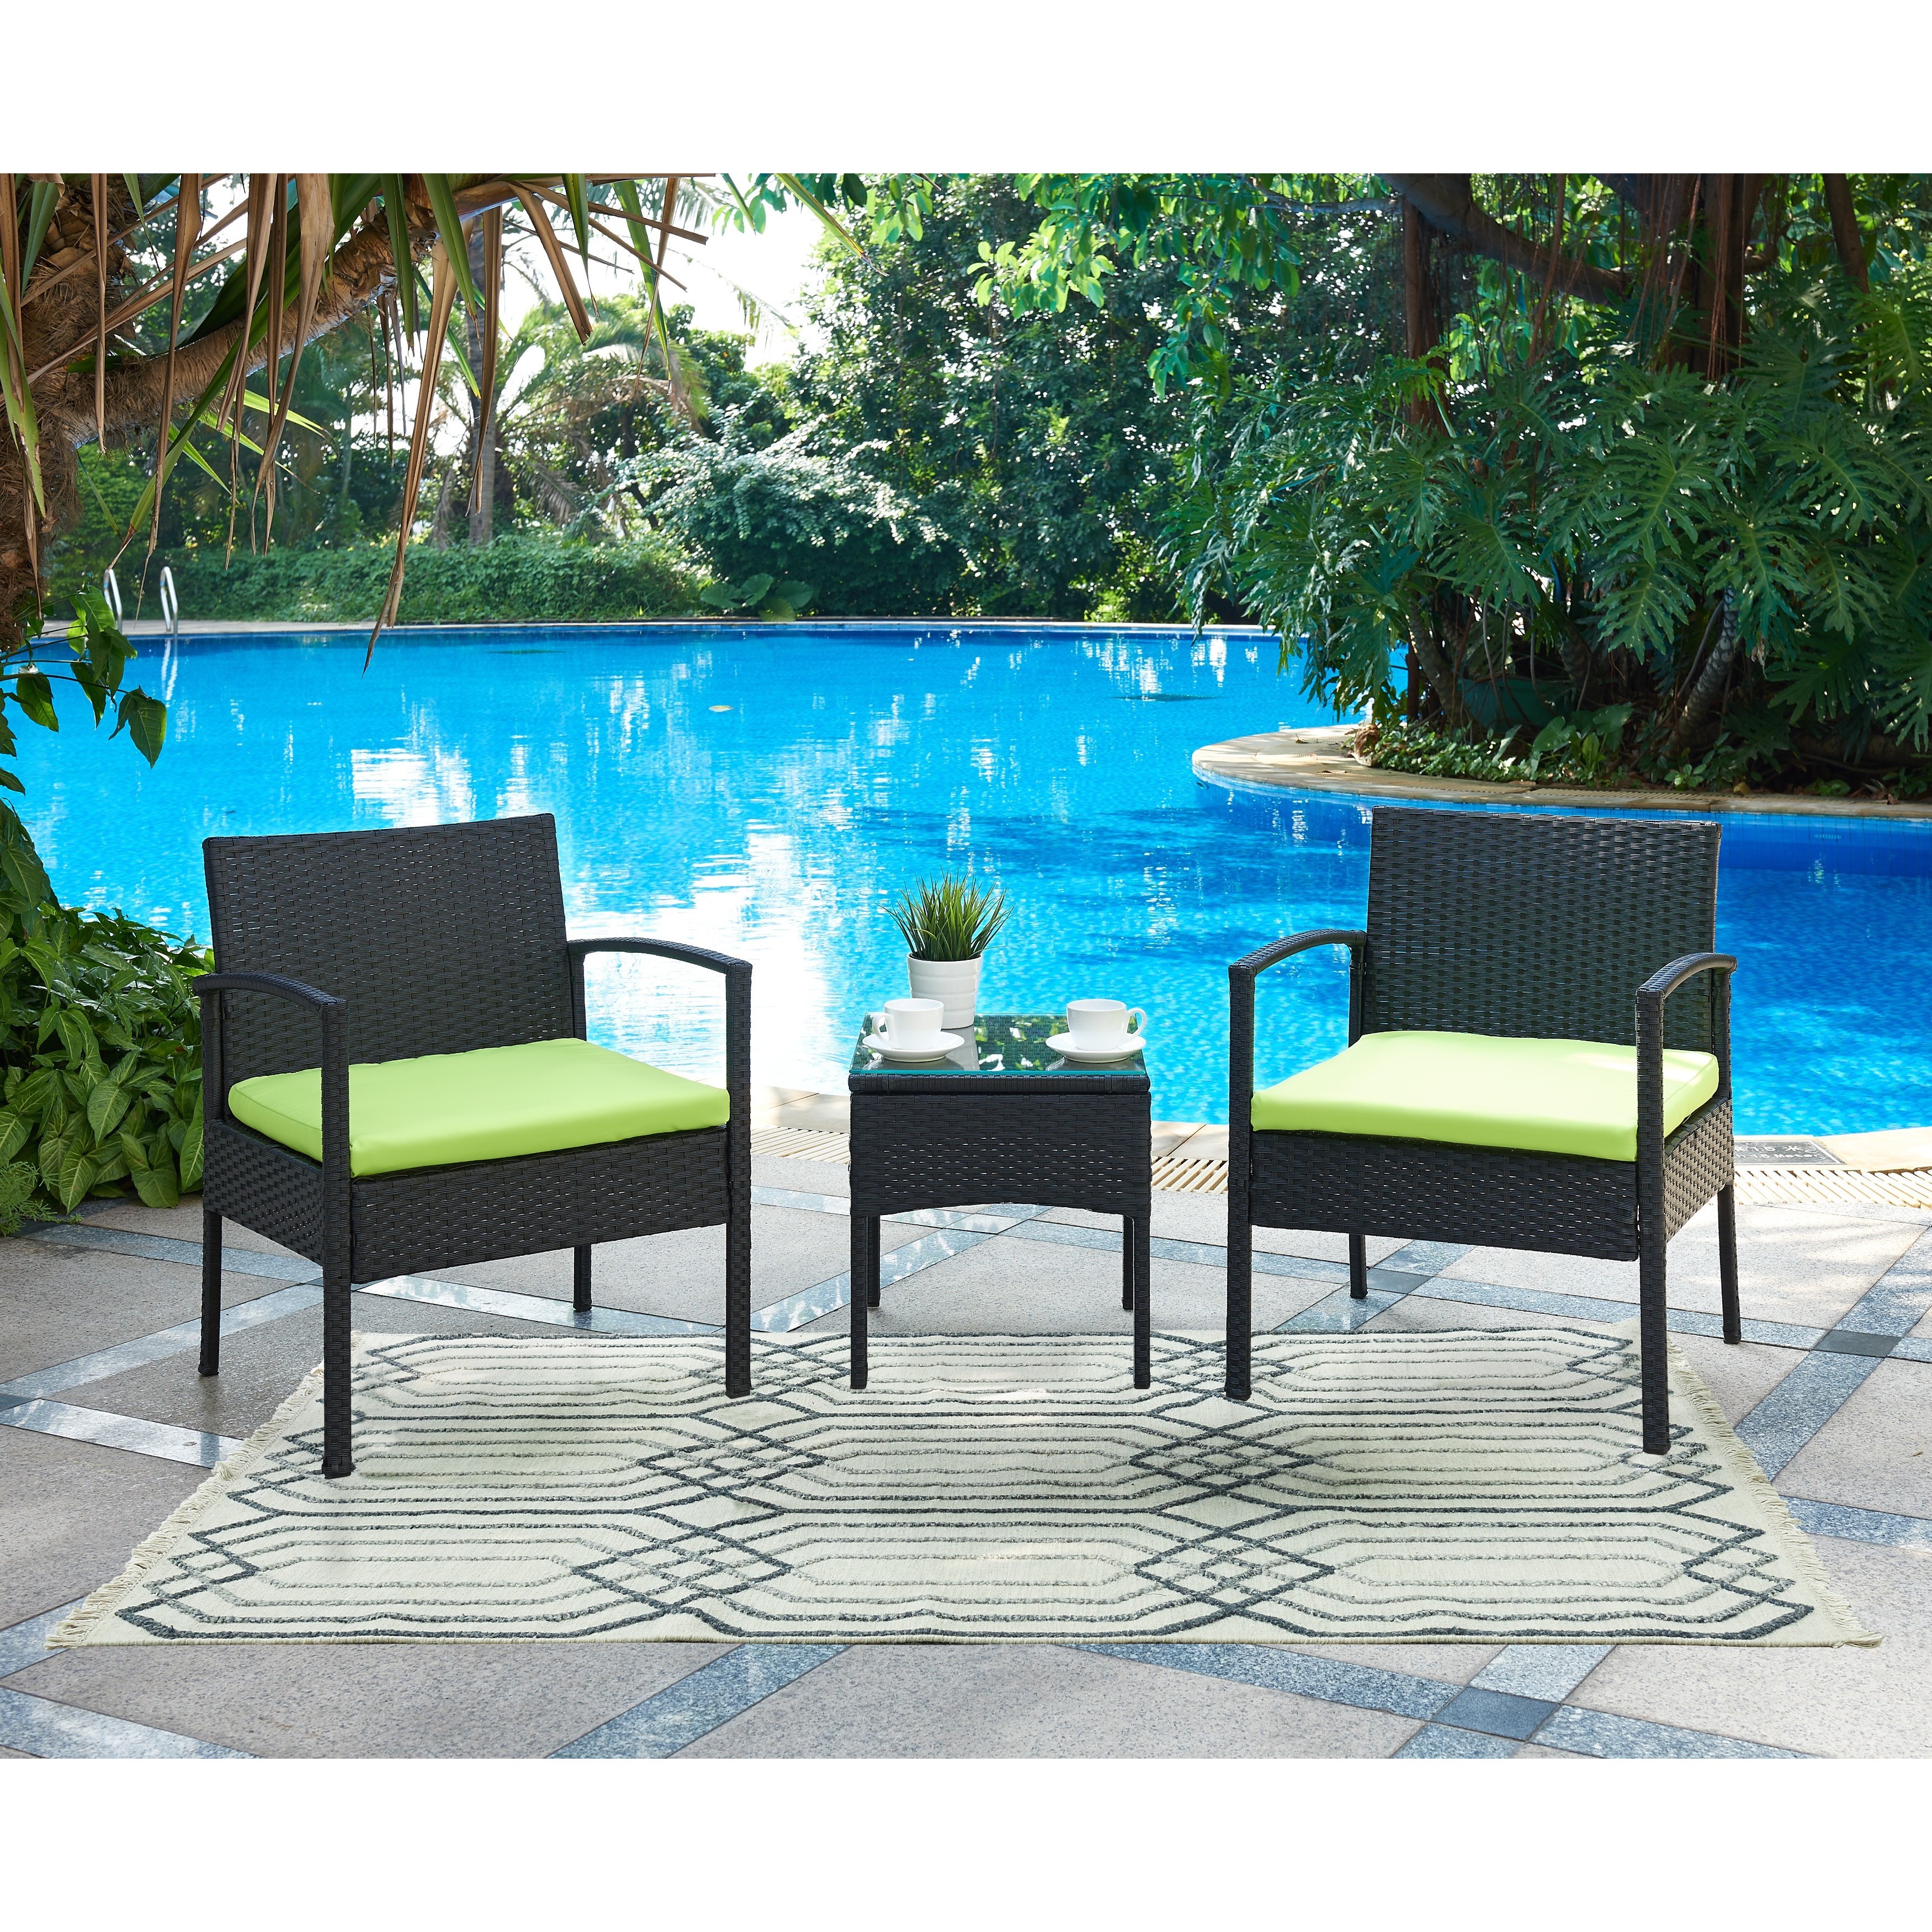 two patio chairs and table